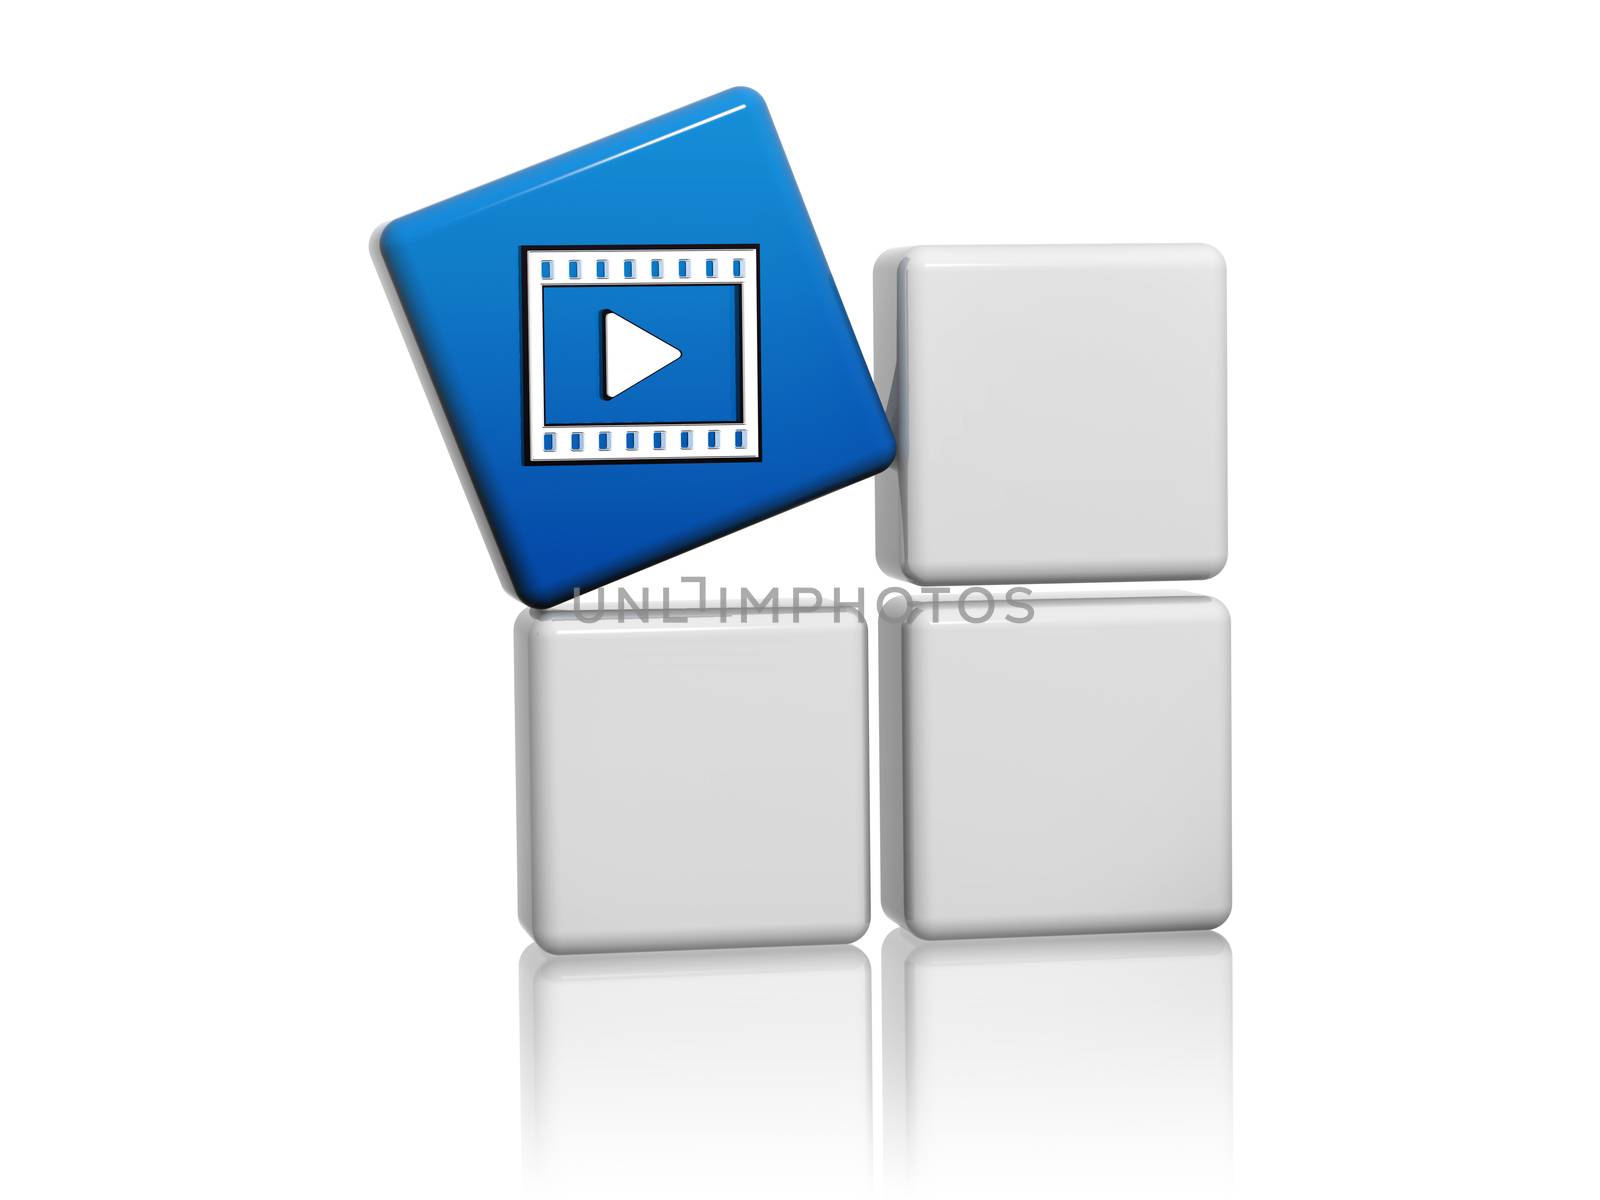 video player sign - blue cube with white symbol on grey boxes 3D illustration, multimedia presentation concept